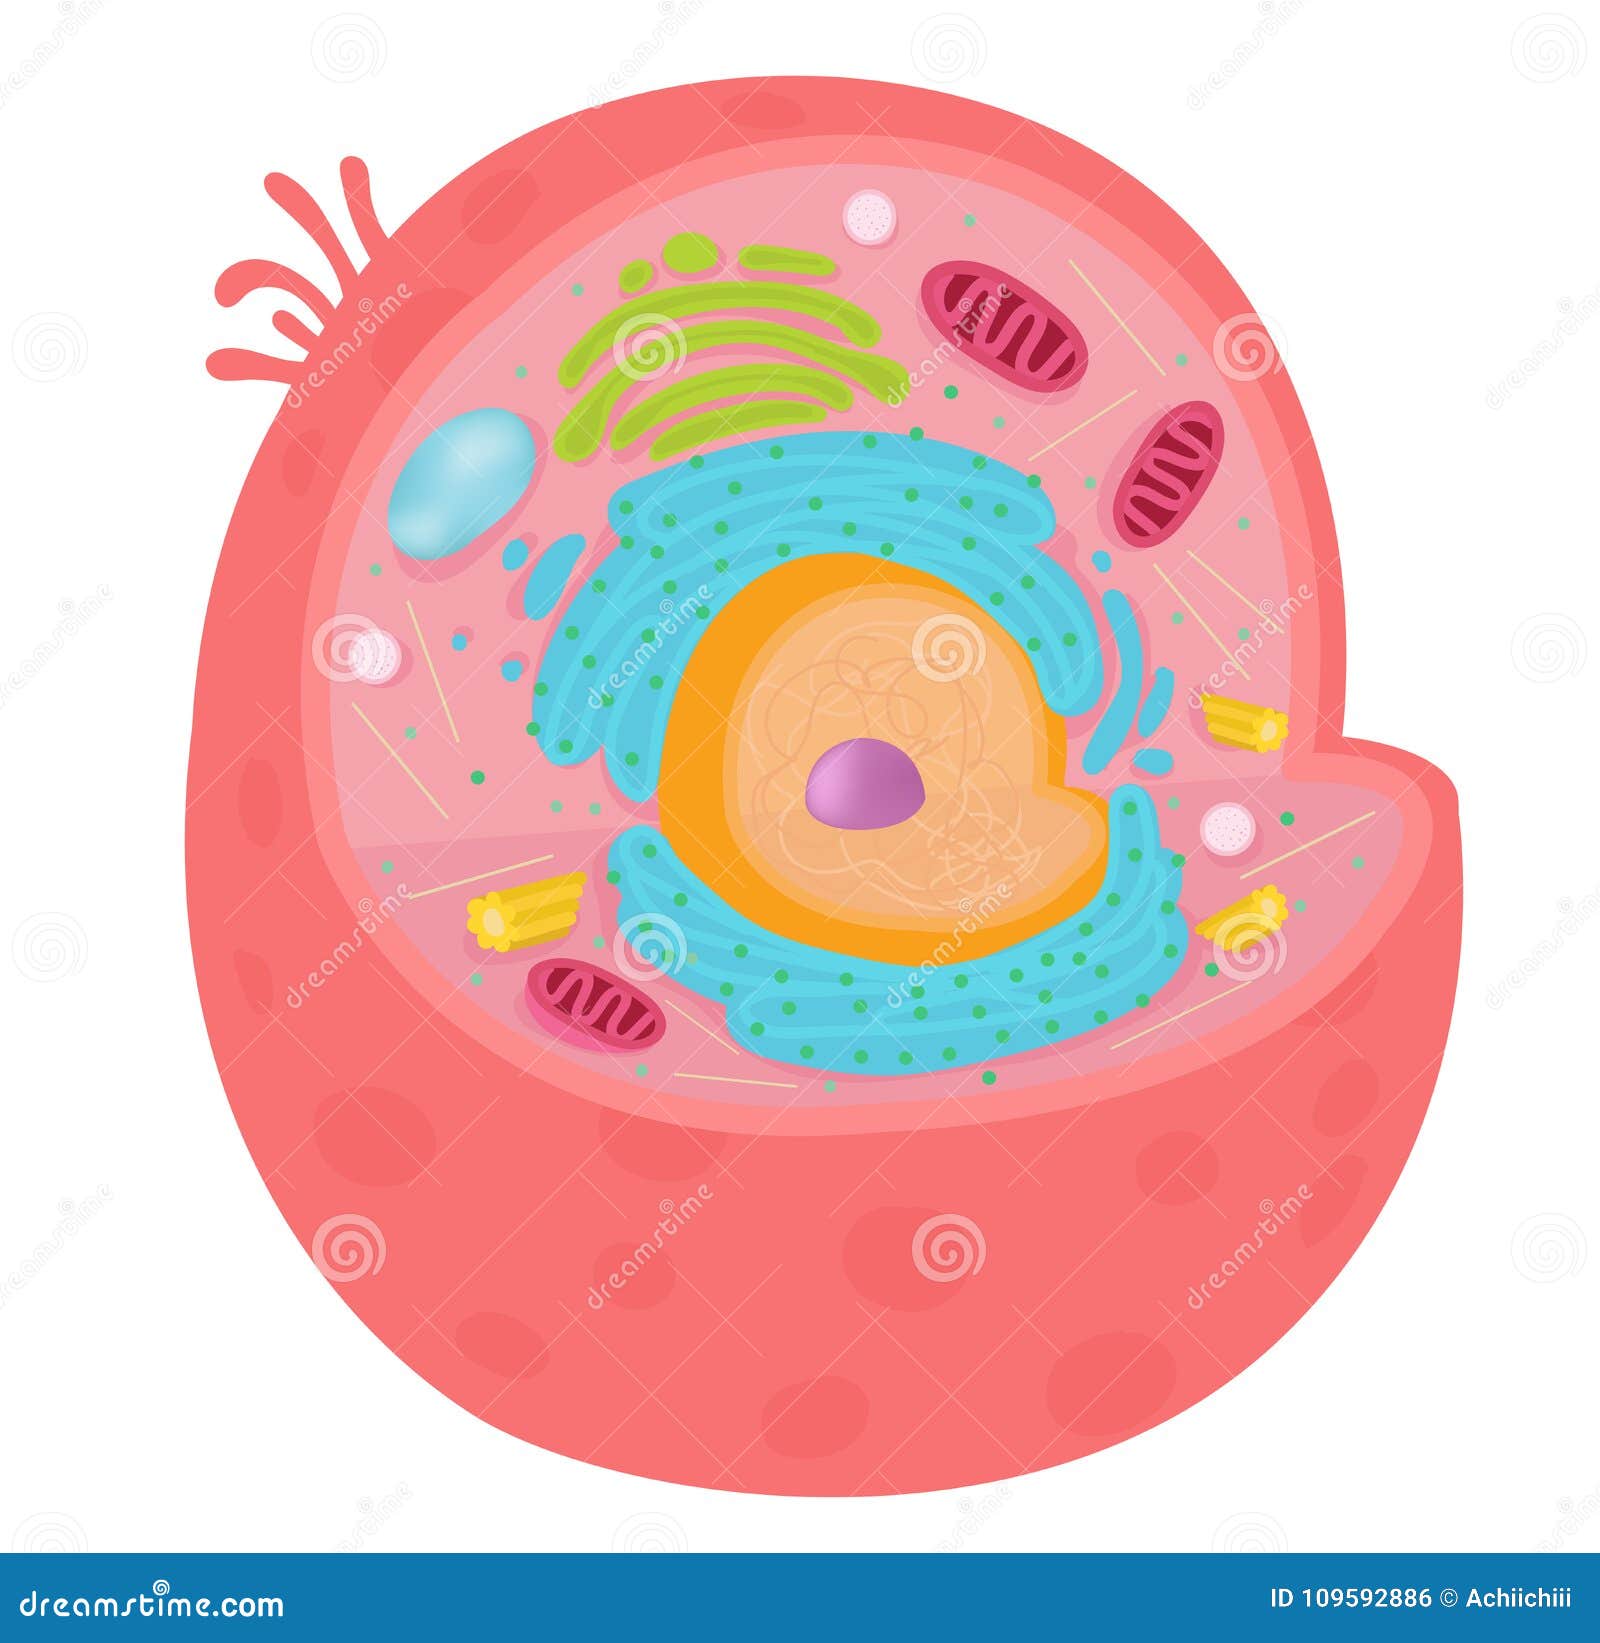 The animal cell diagram stock vector. Illustration of eggs - 109592886